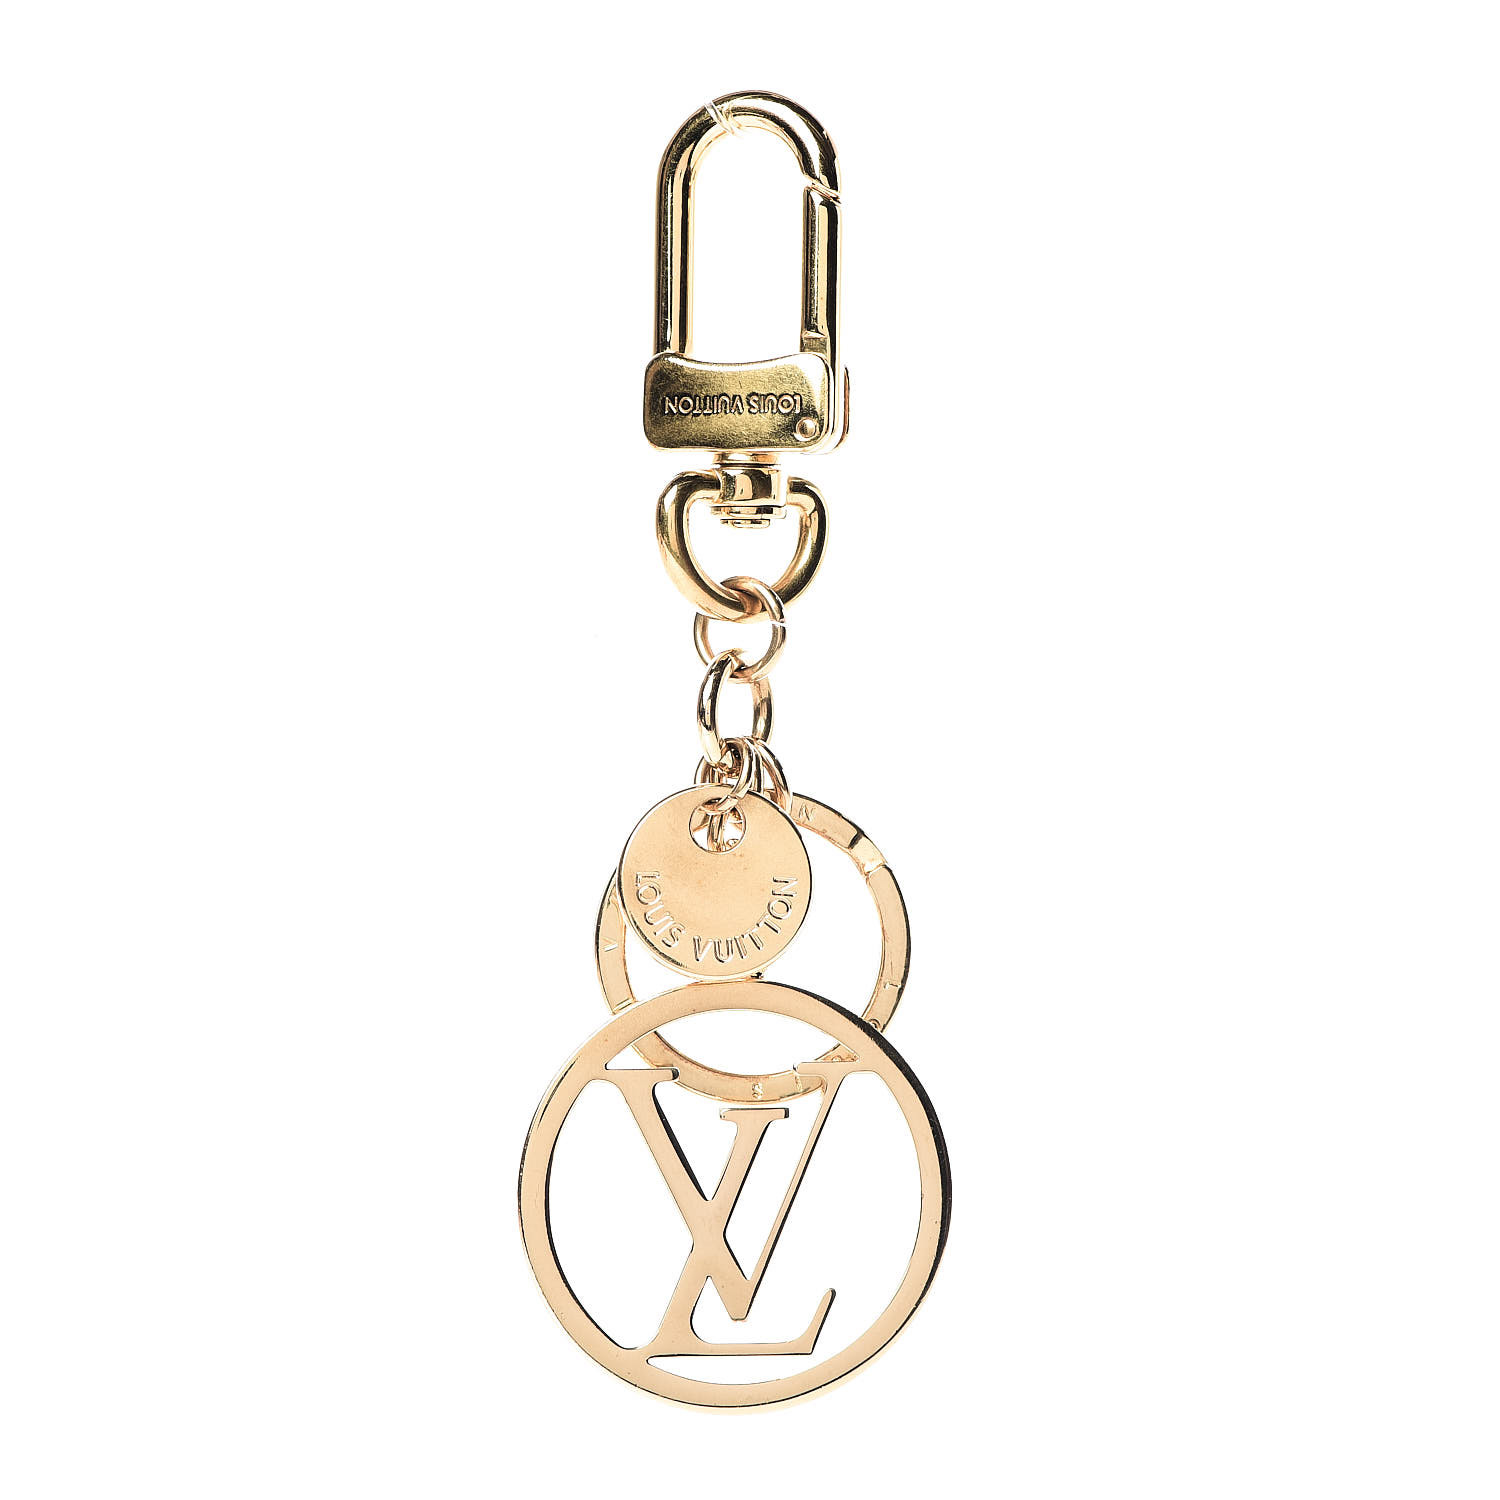 Lv Charms For Bracelets  Natural Resource Department